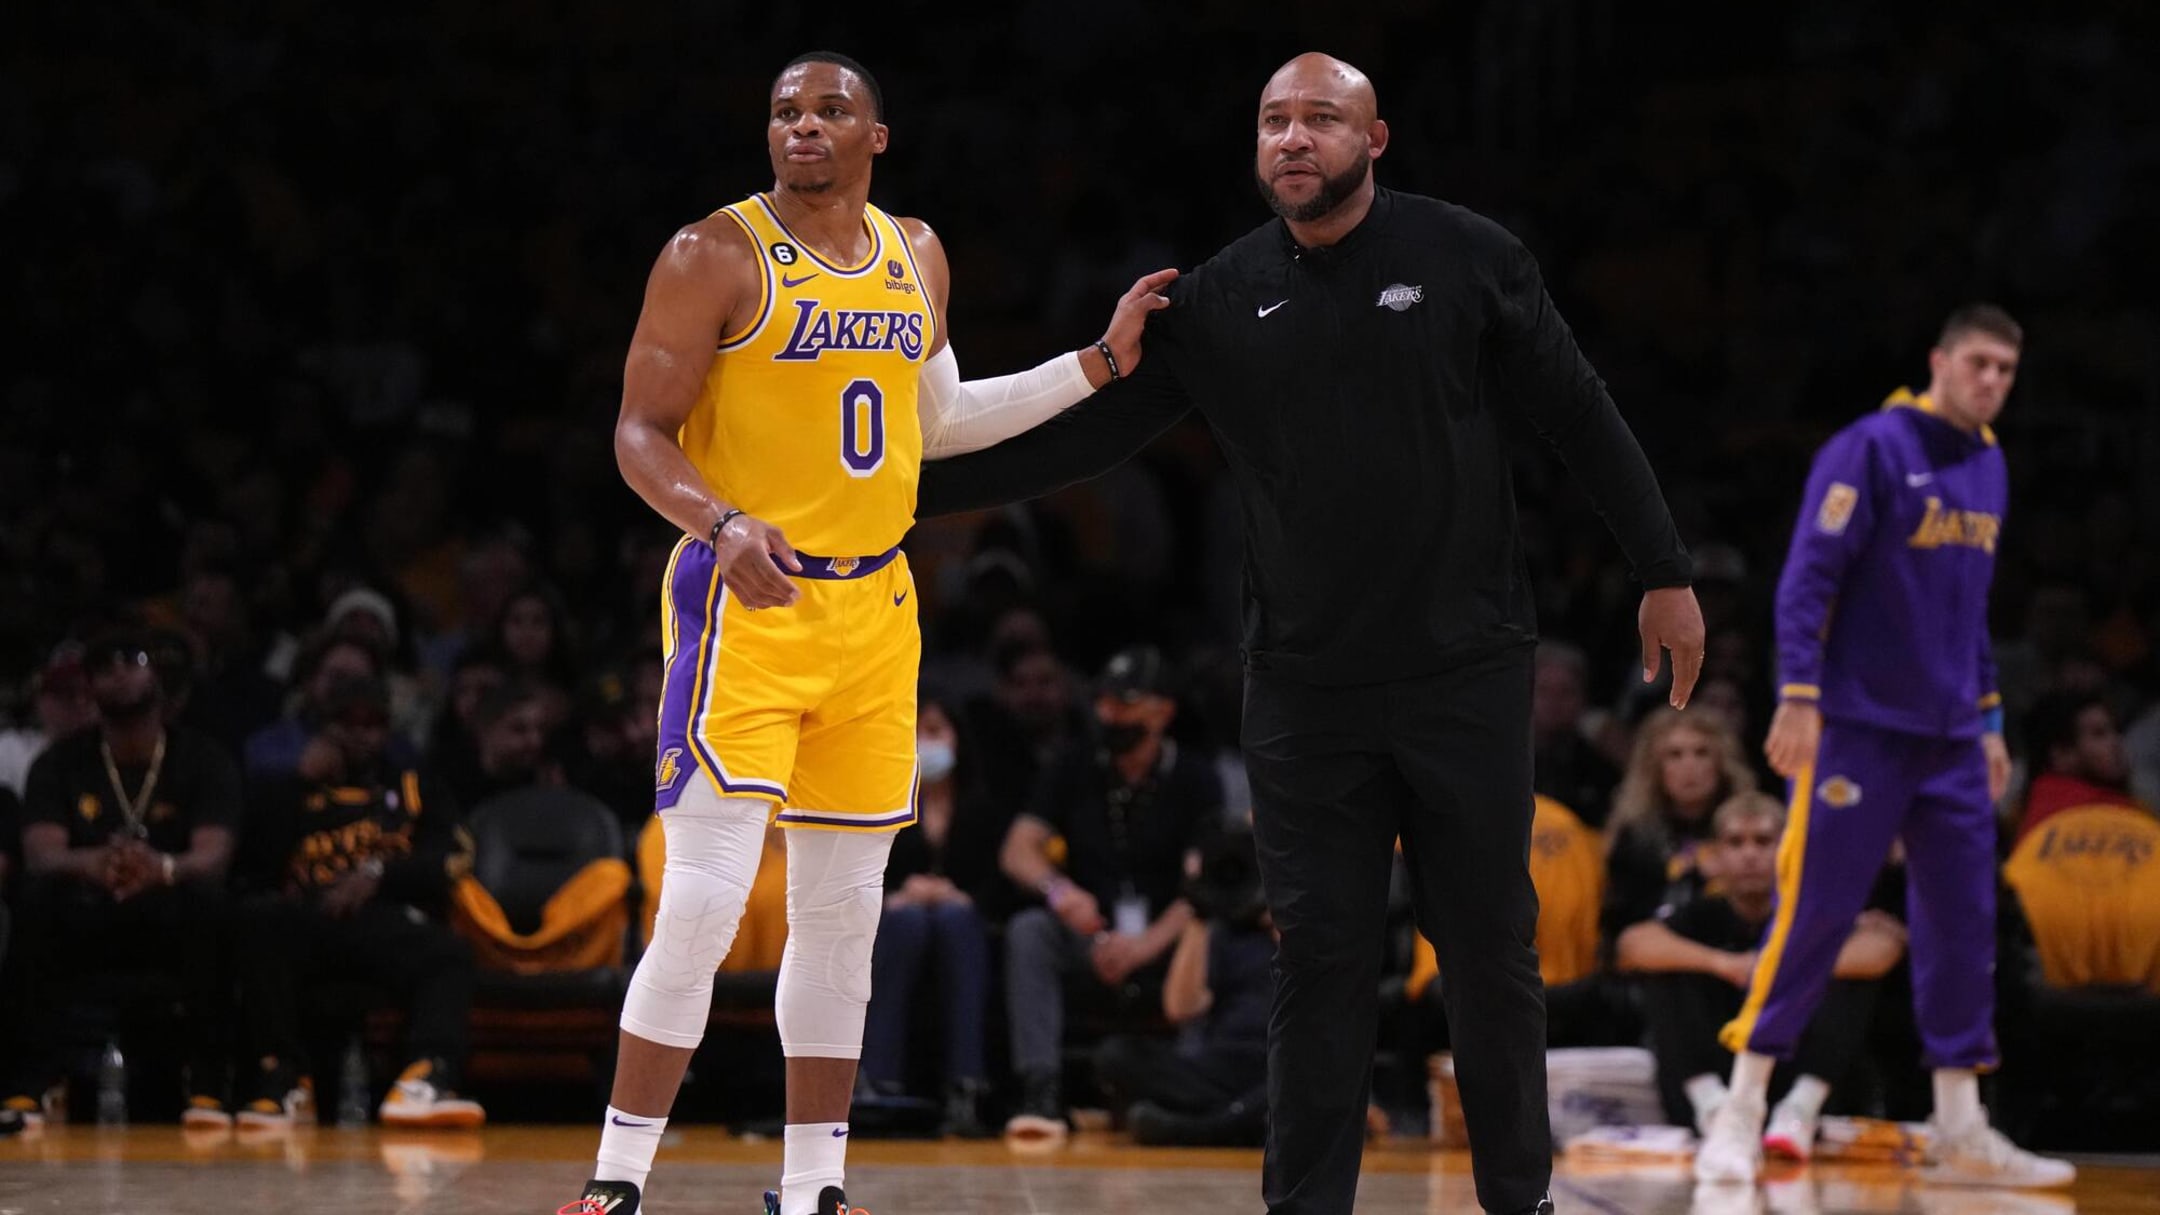 Los Angeles Lakers Current Players' Salaries And Contracts, Fadeaway World